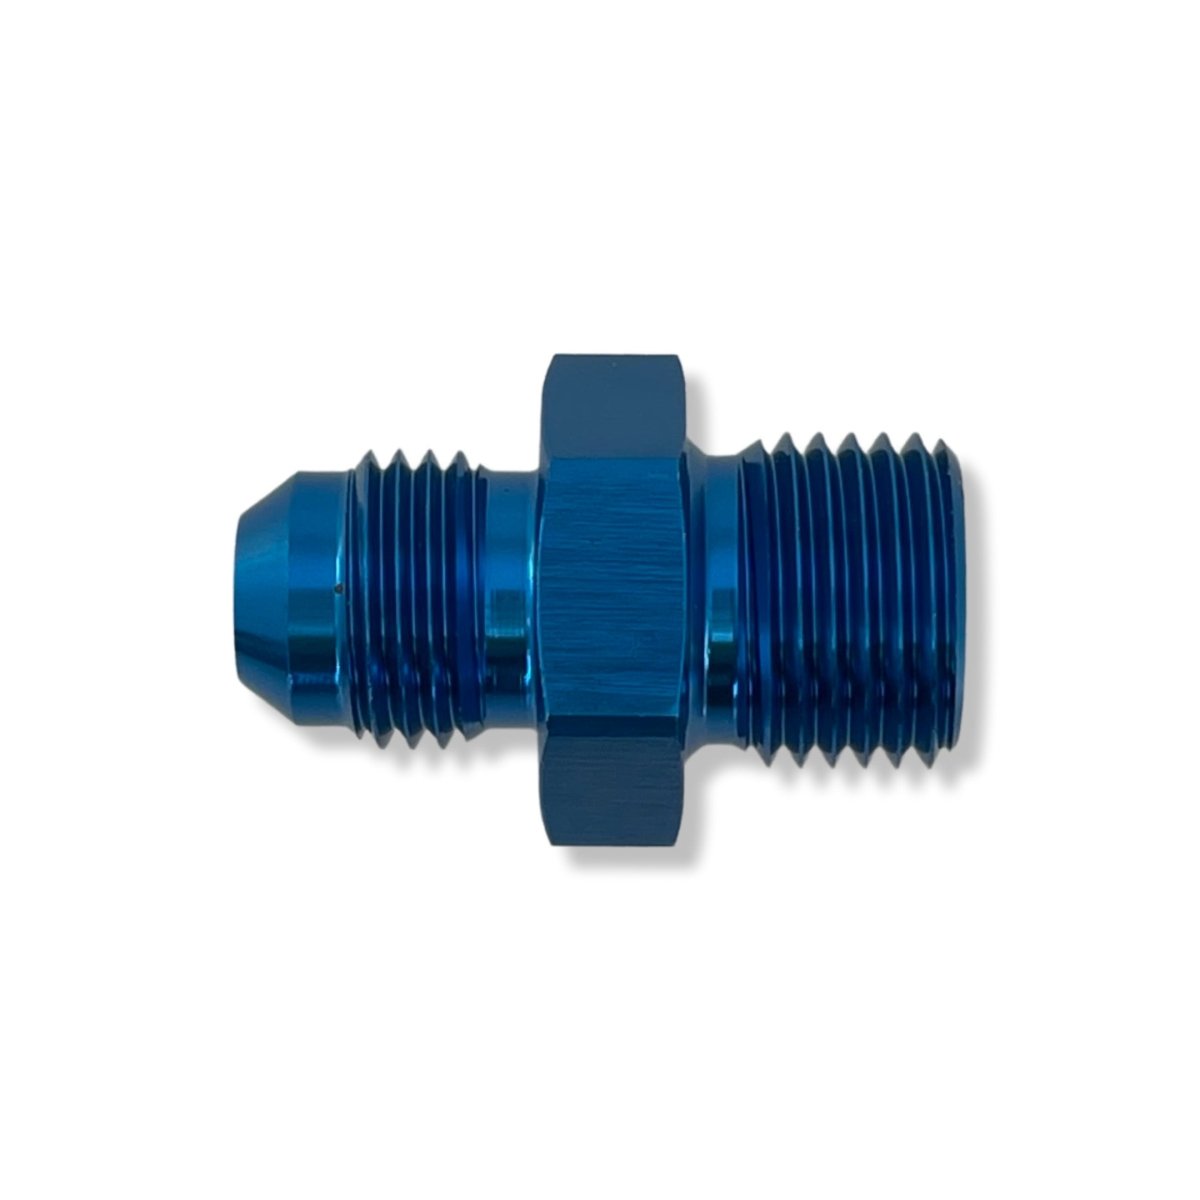 AN6 to M16x1.5 Concave Male Adapter - Blue - 3060665D by AN3 Parts